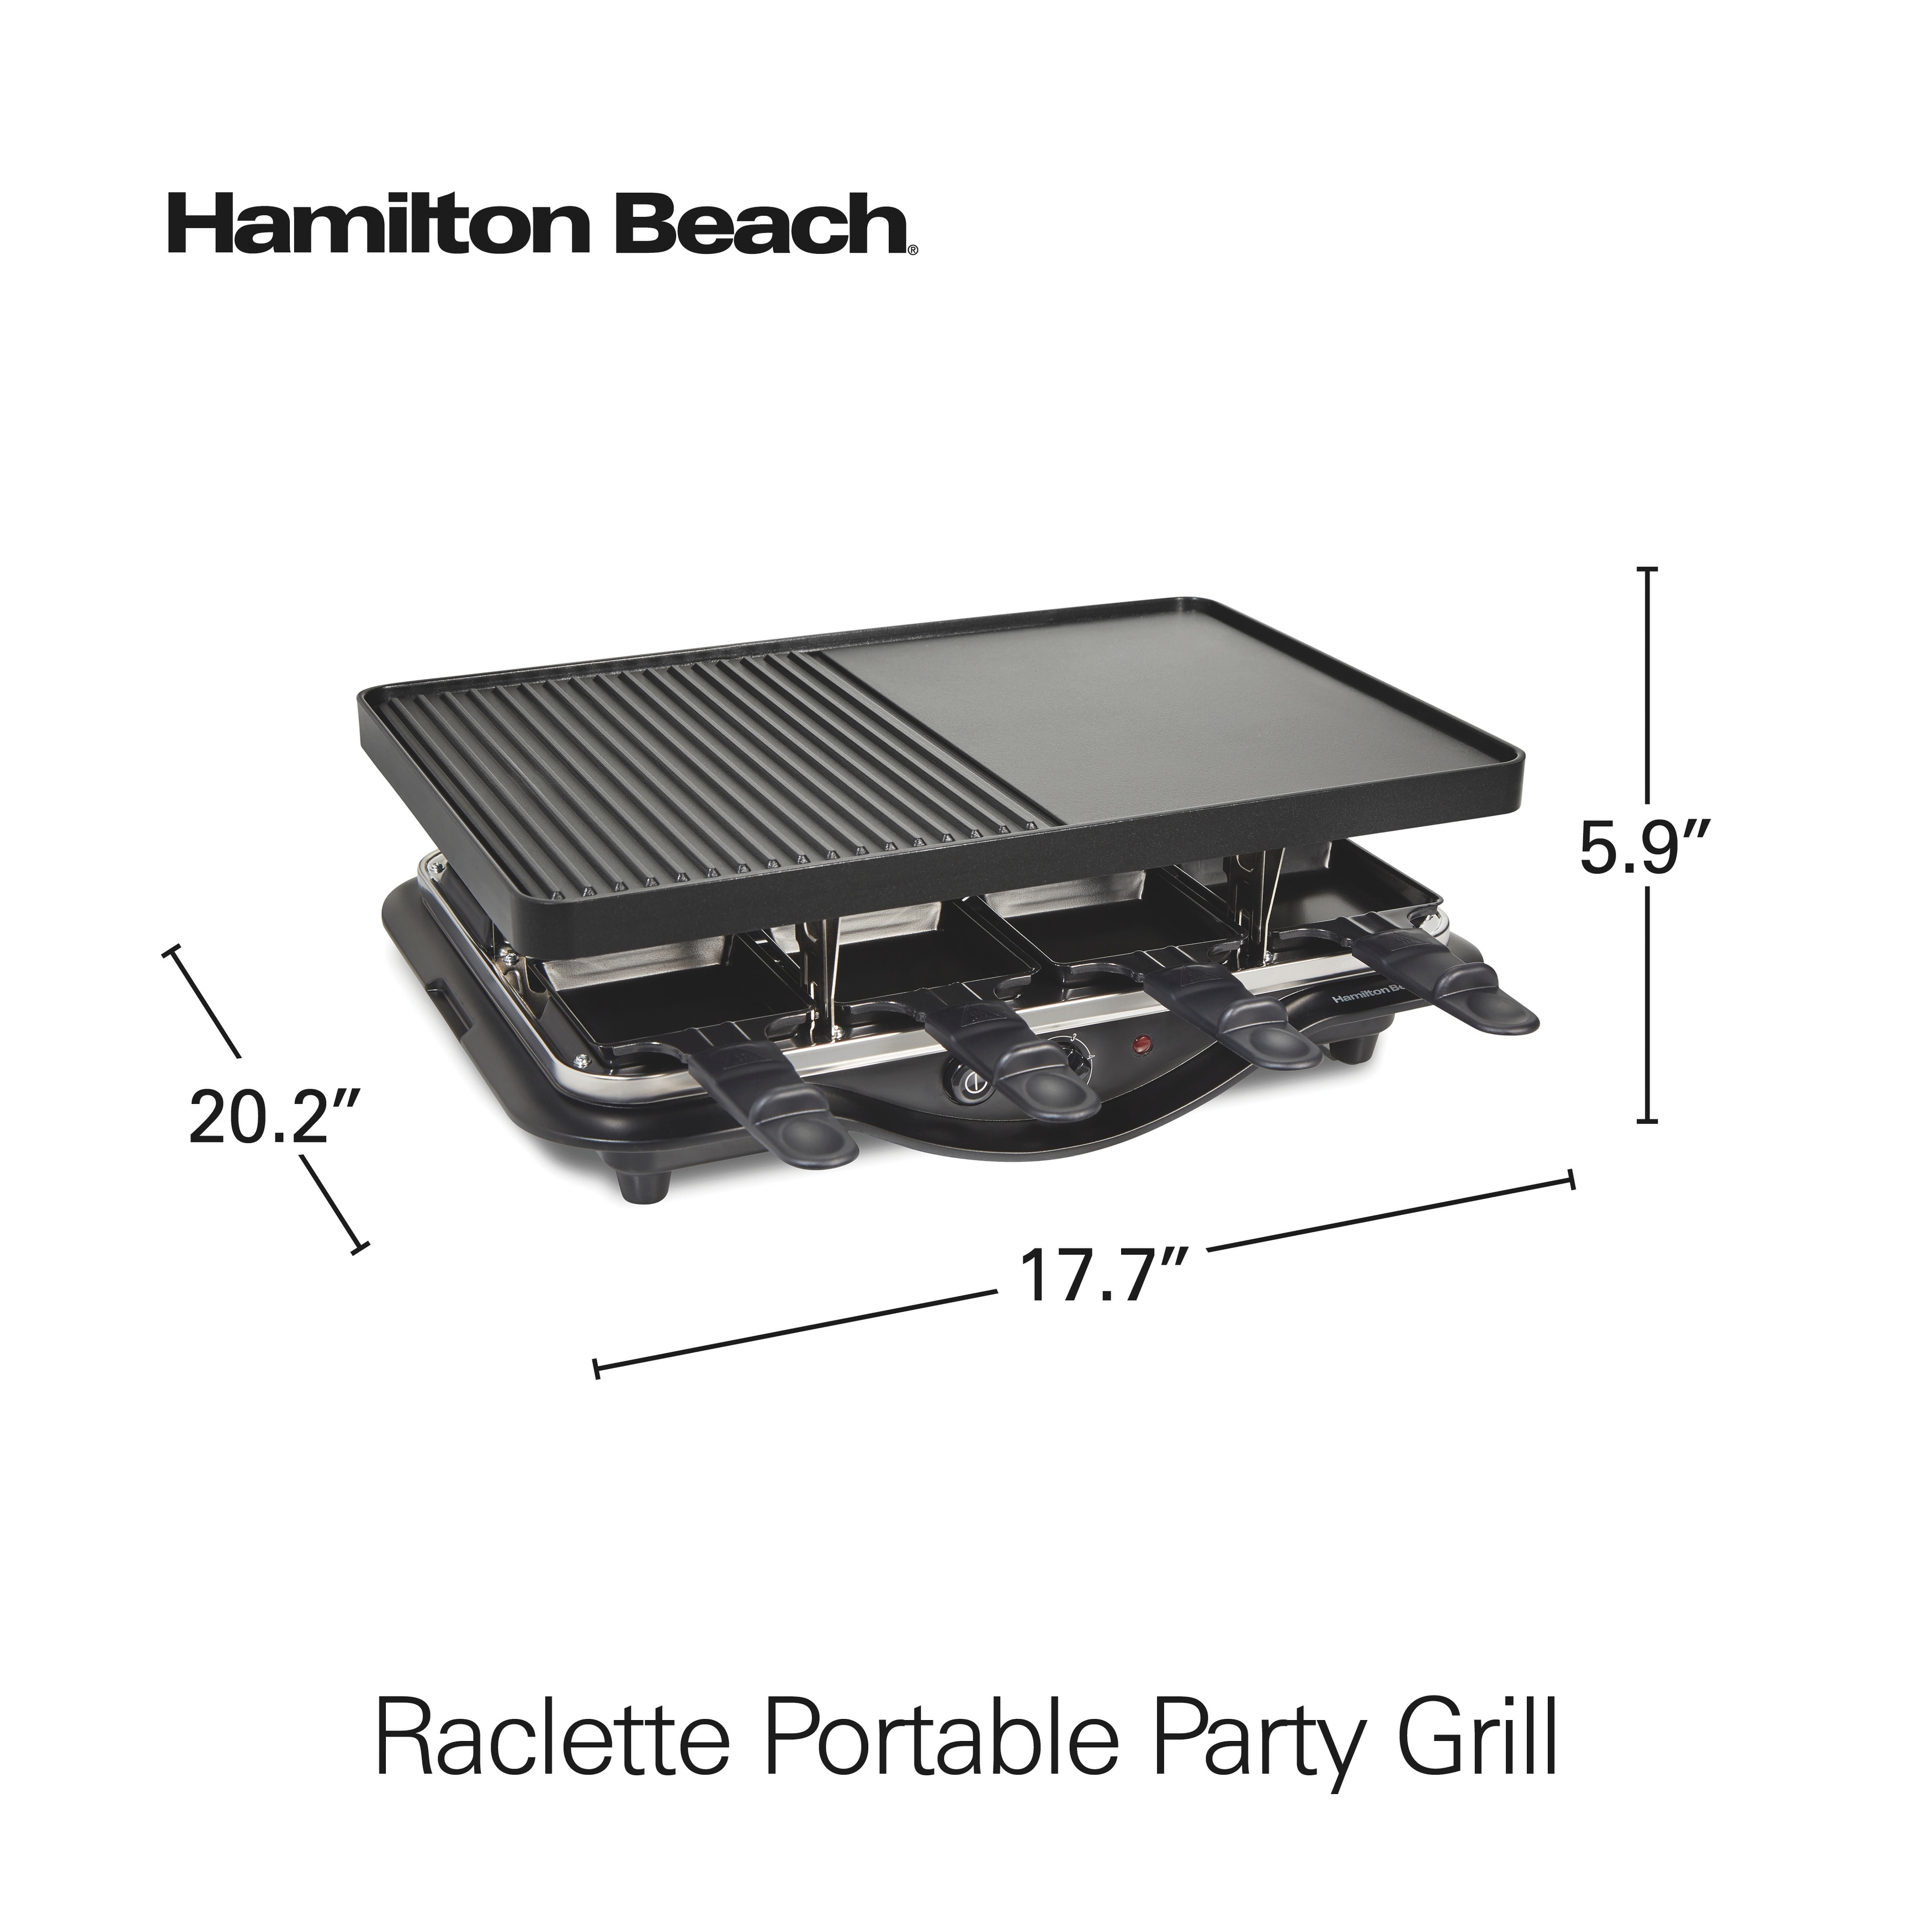 https://ak1.ostkcdn.com/images/products/is/images/direct/75c712df7622b8670fbba482c6ac65cbe2456070/Hamilton-Beach-Raclette-Portable-Party-Grill.jpg